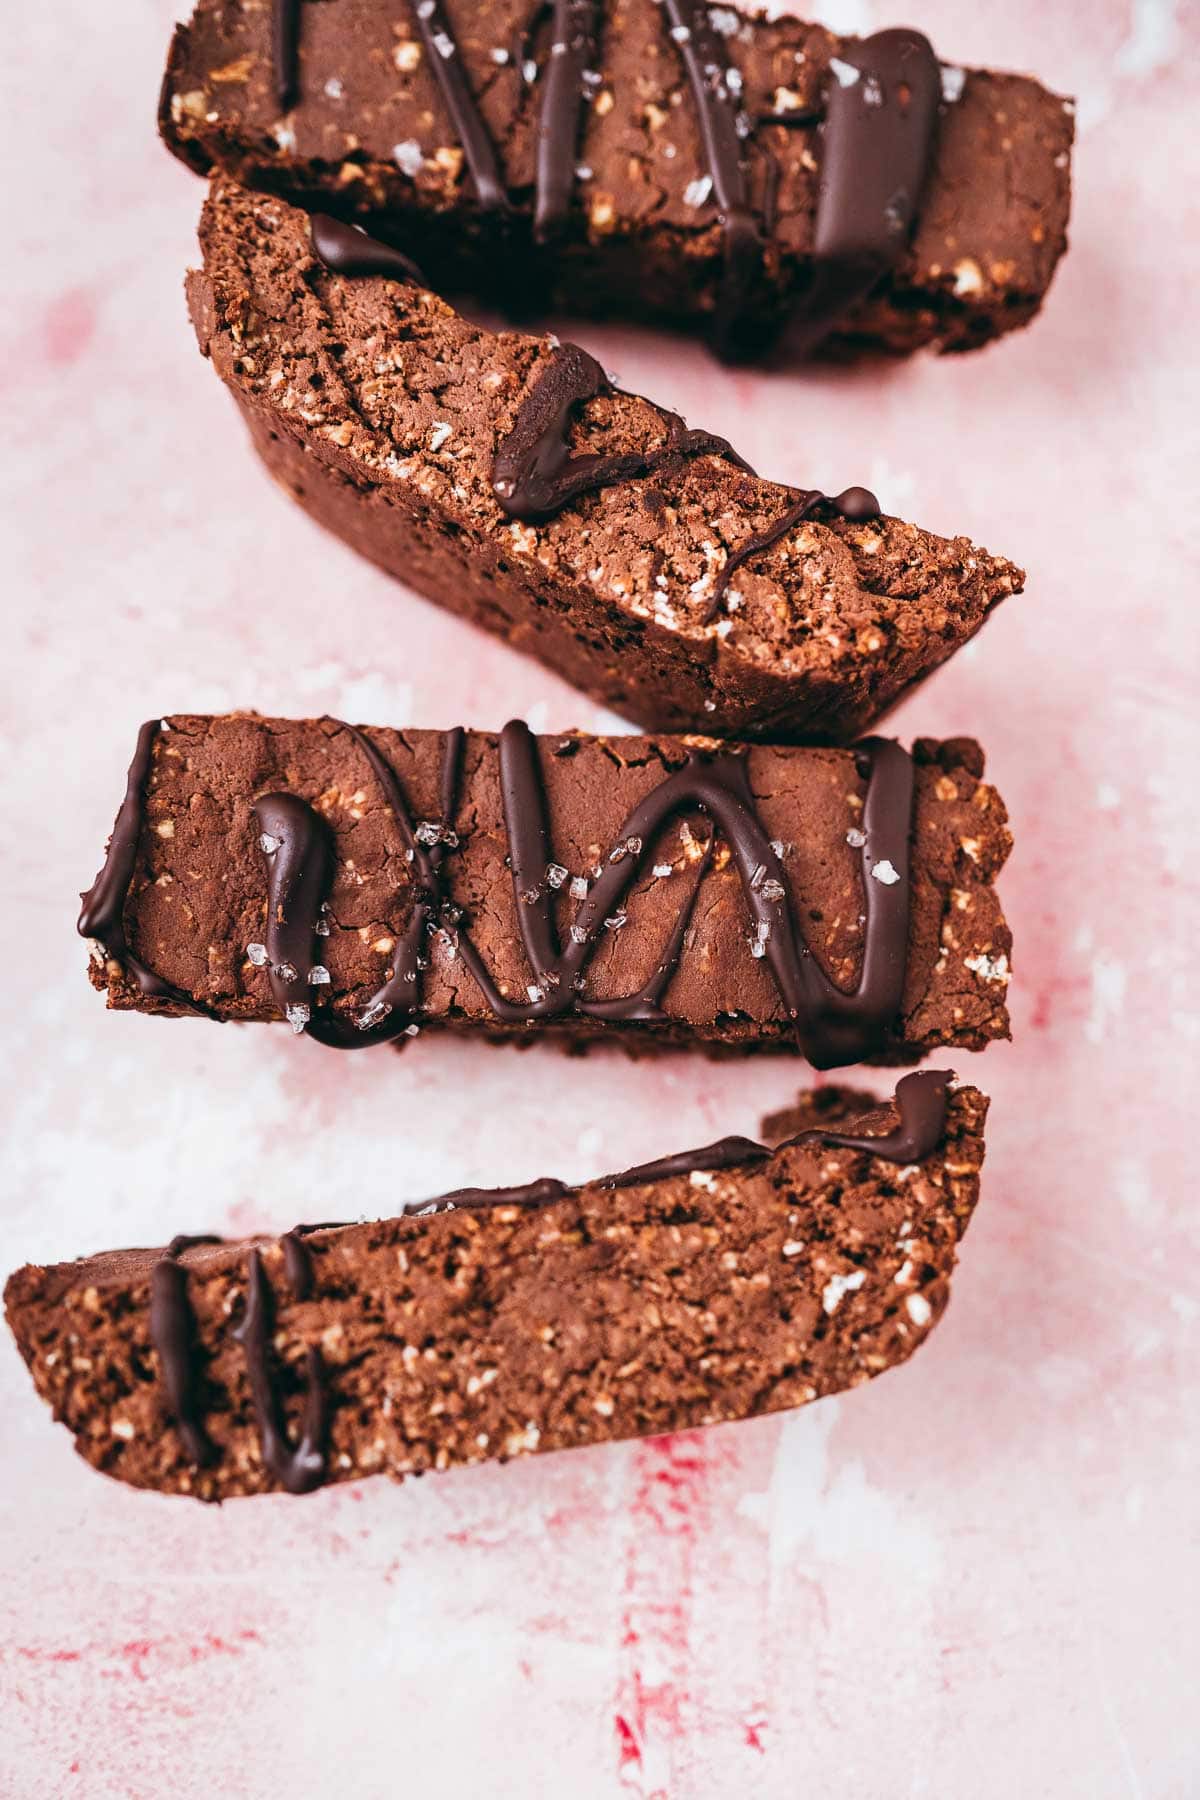 Four mocha protein bars drizzled with chocolate and sprinkled with salt.